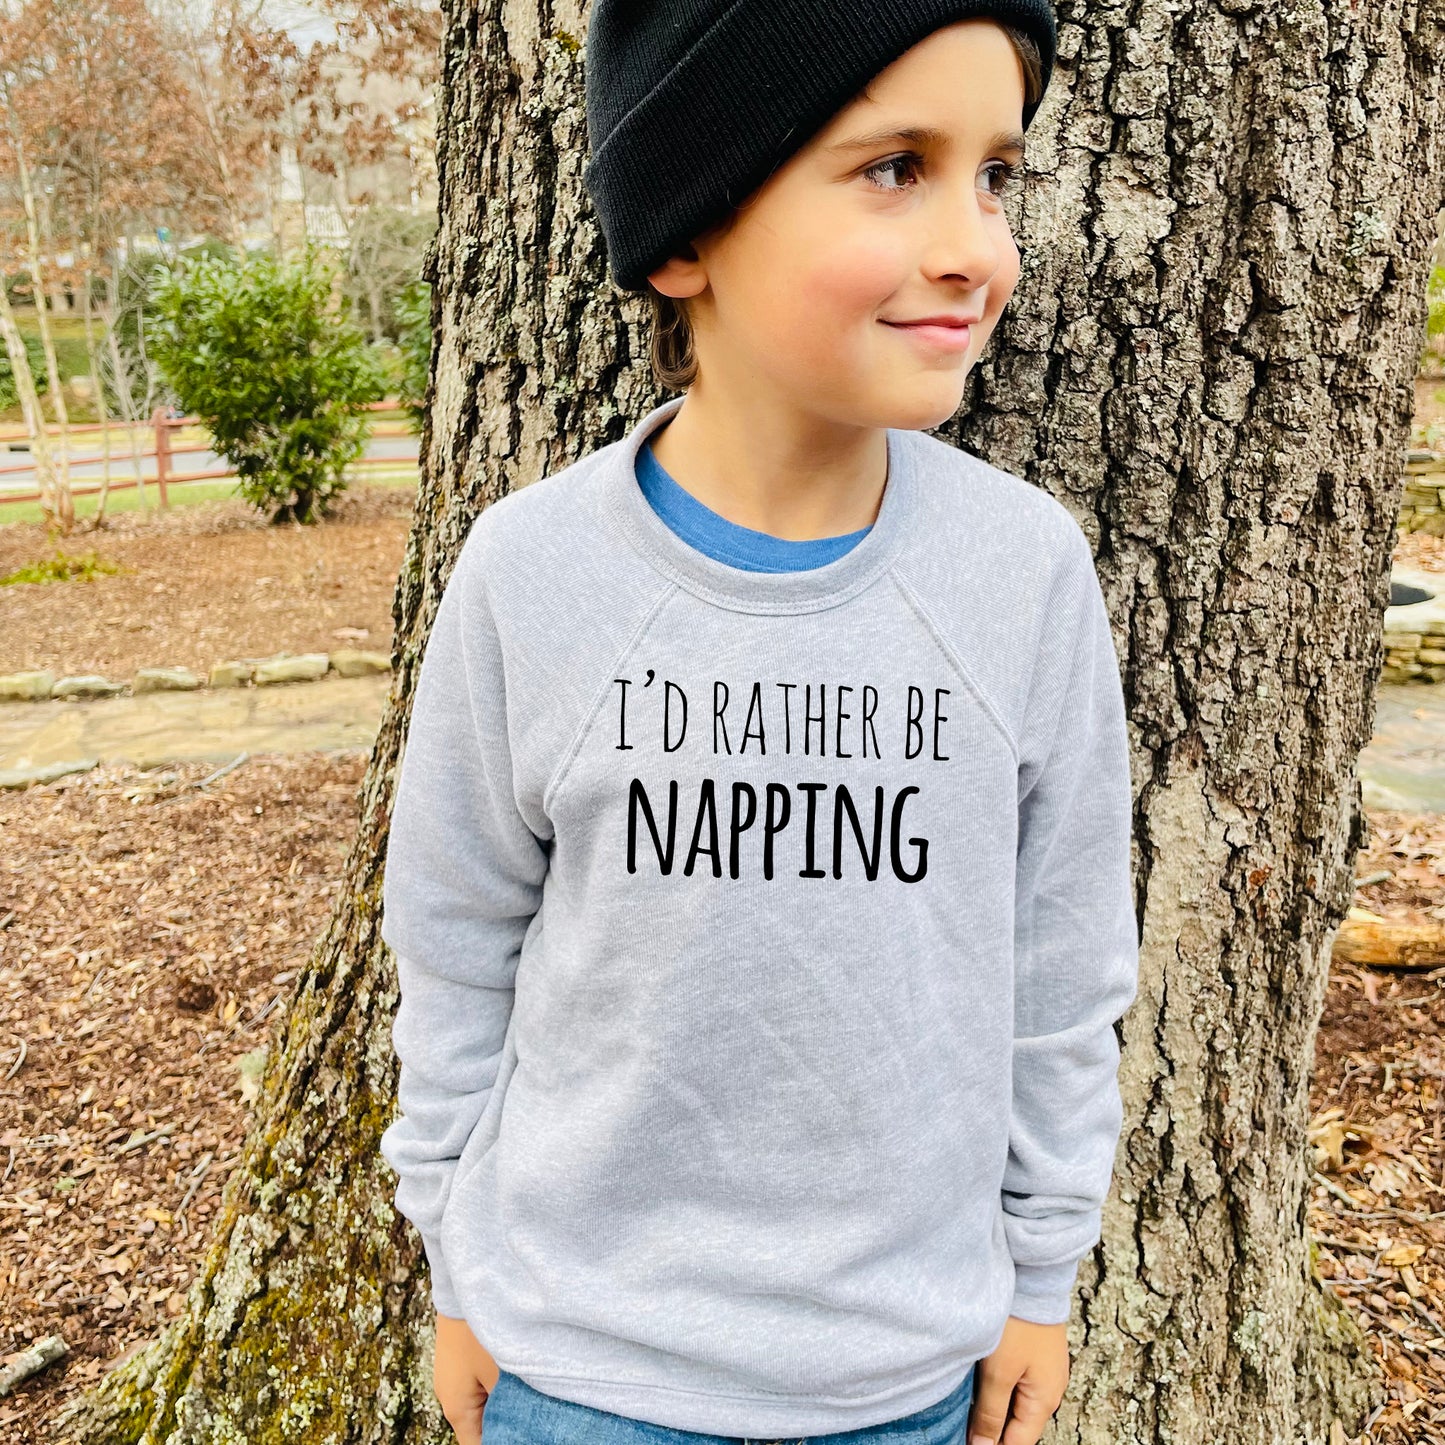 I'd Rather Be Napping - Kid's Sweatshirt - Heather Gray or Mauve